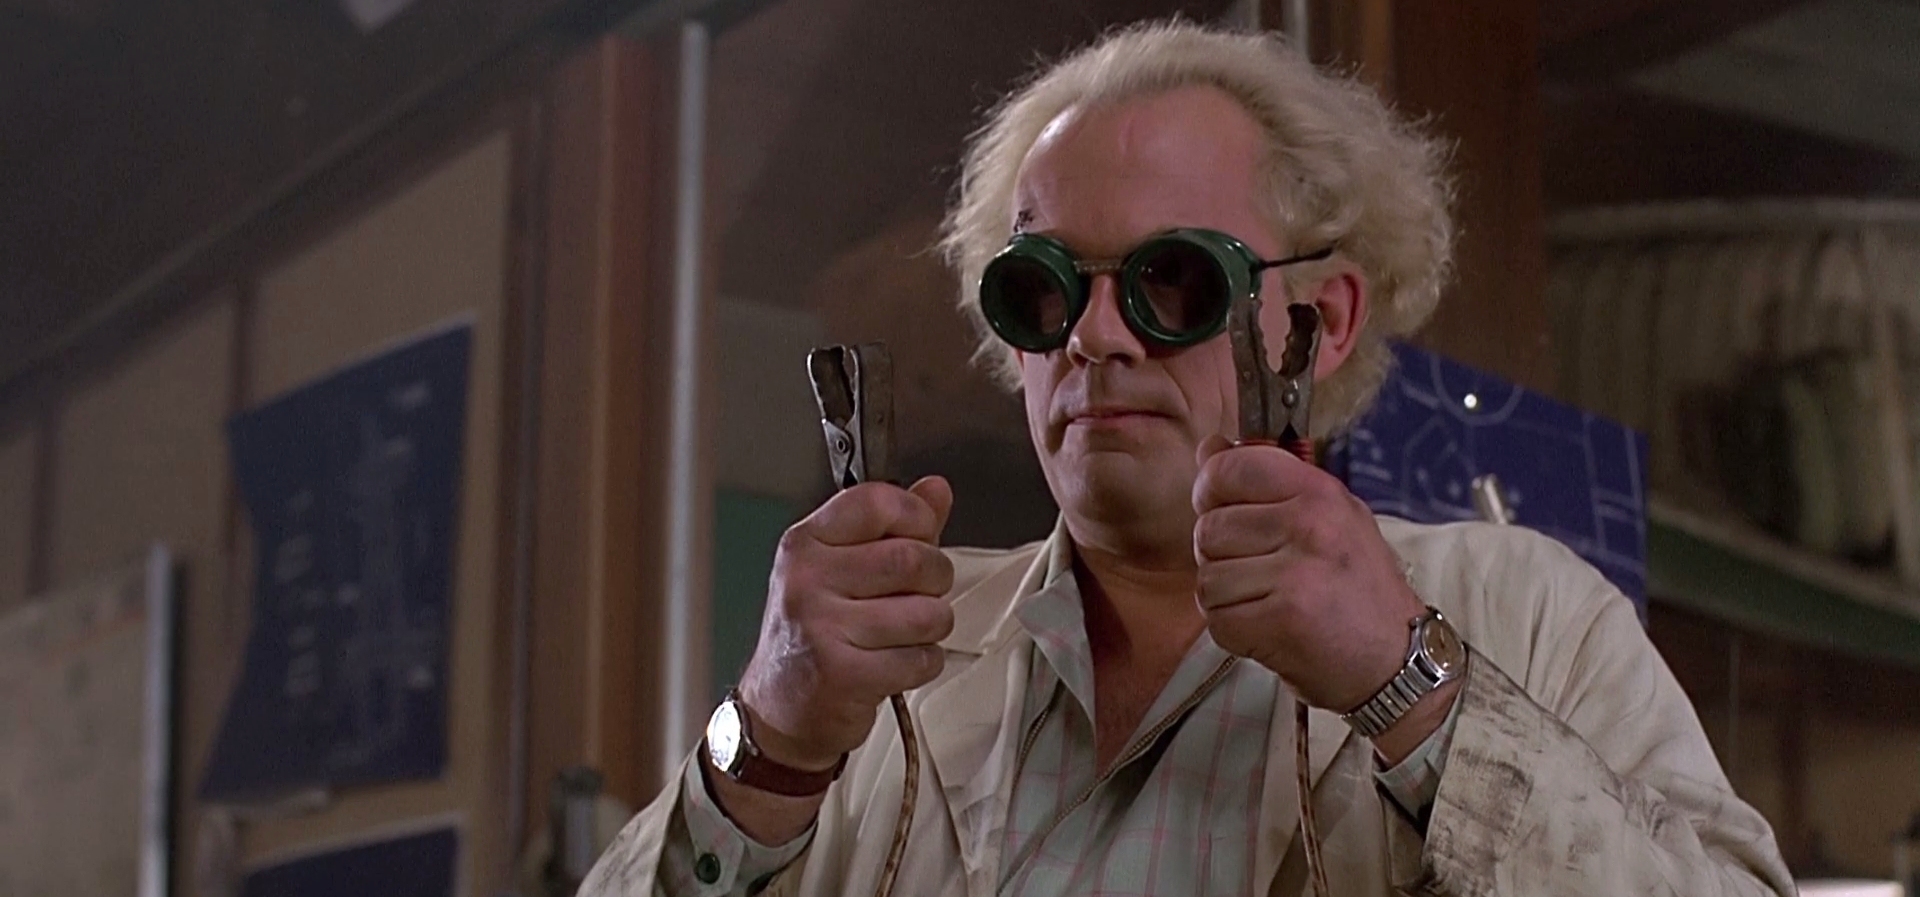 Back To The Future: What Is Doc Brown Up To In This New Short Film?